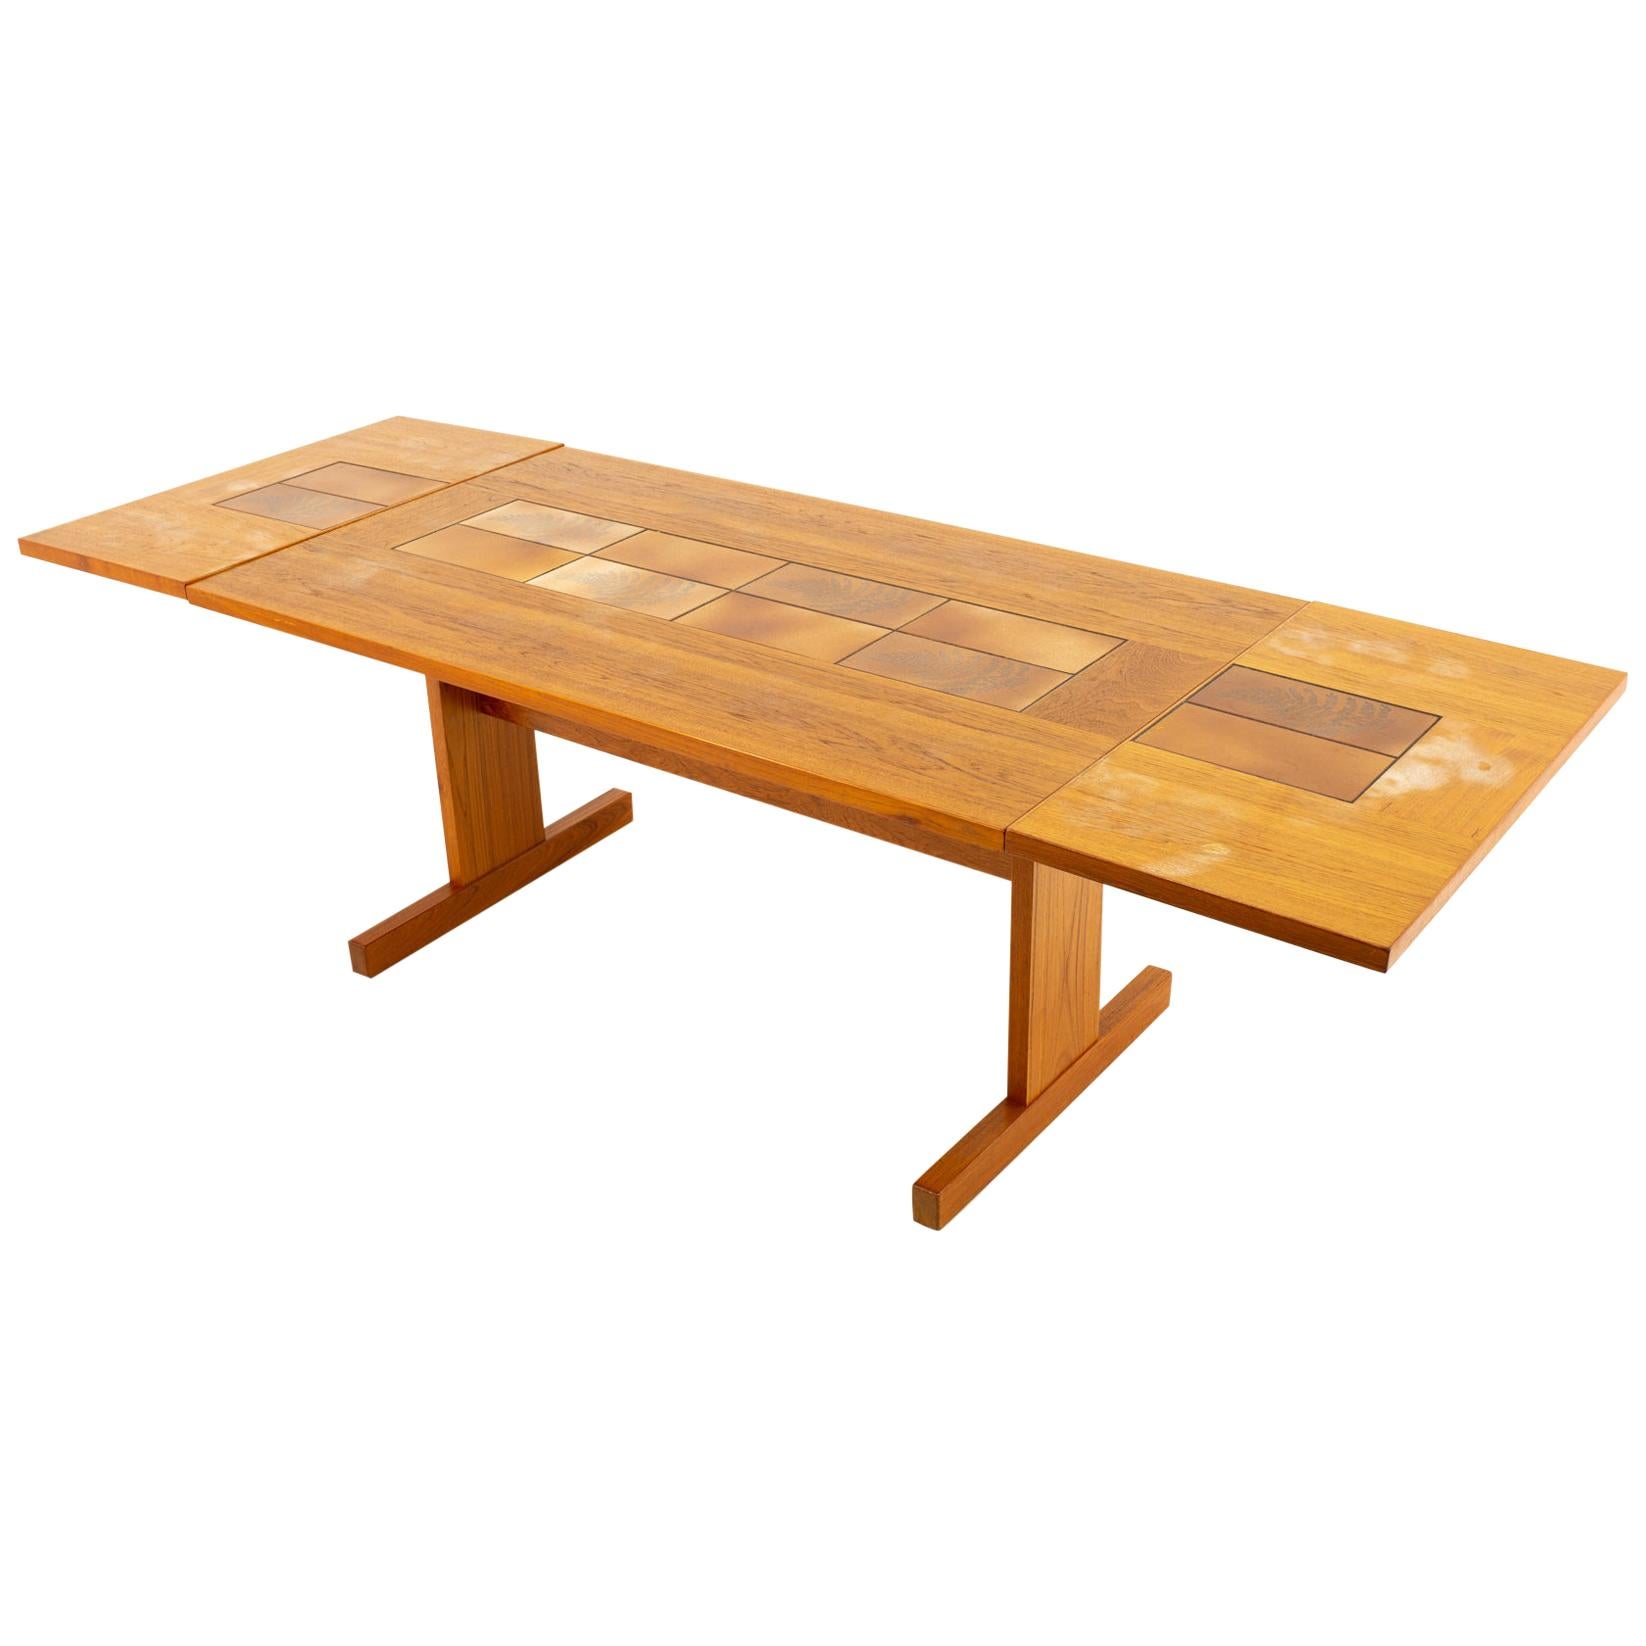 Textile Mid-Century Modern Teak Dining Table with Tile Inlay For Sale